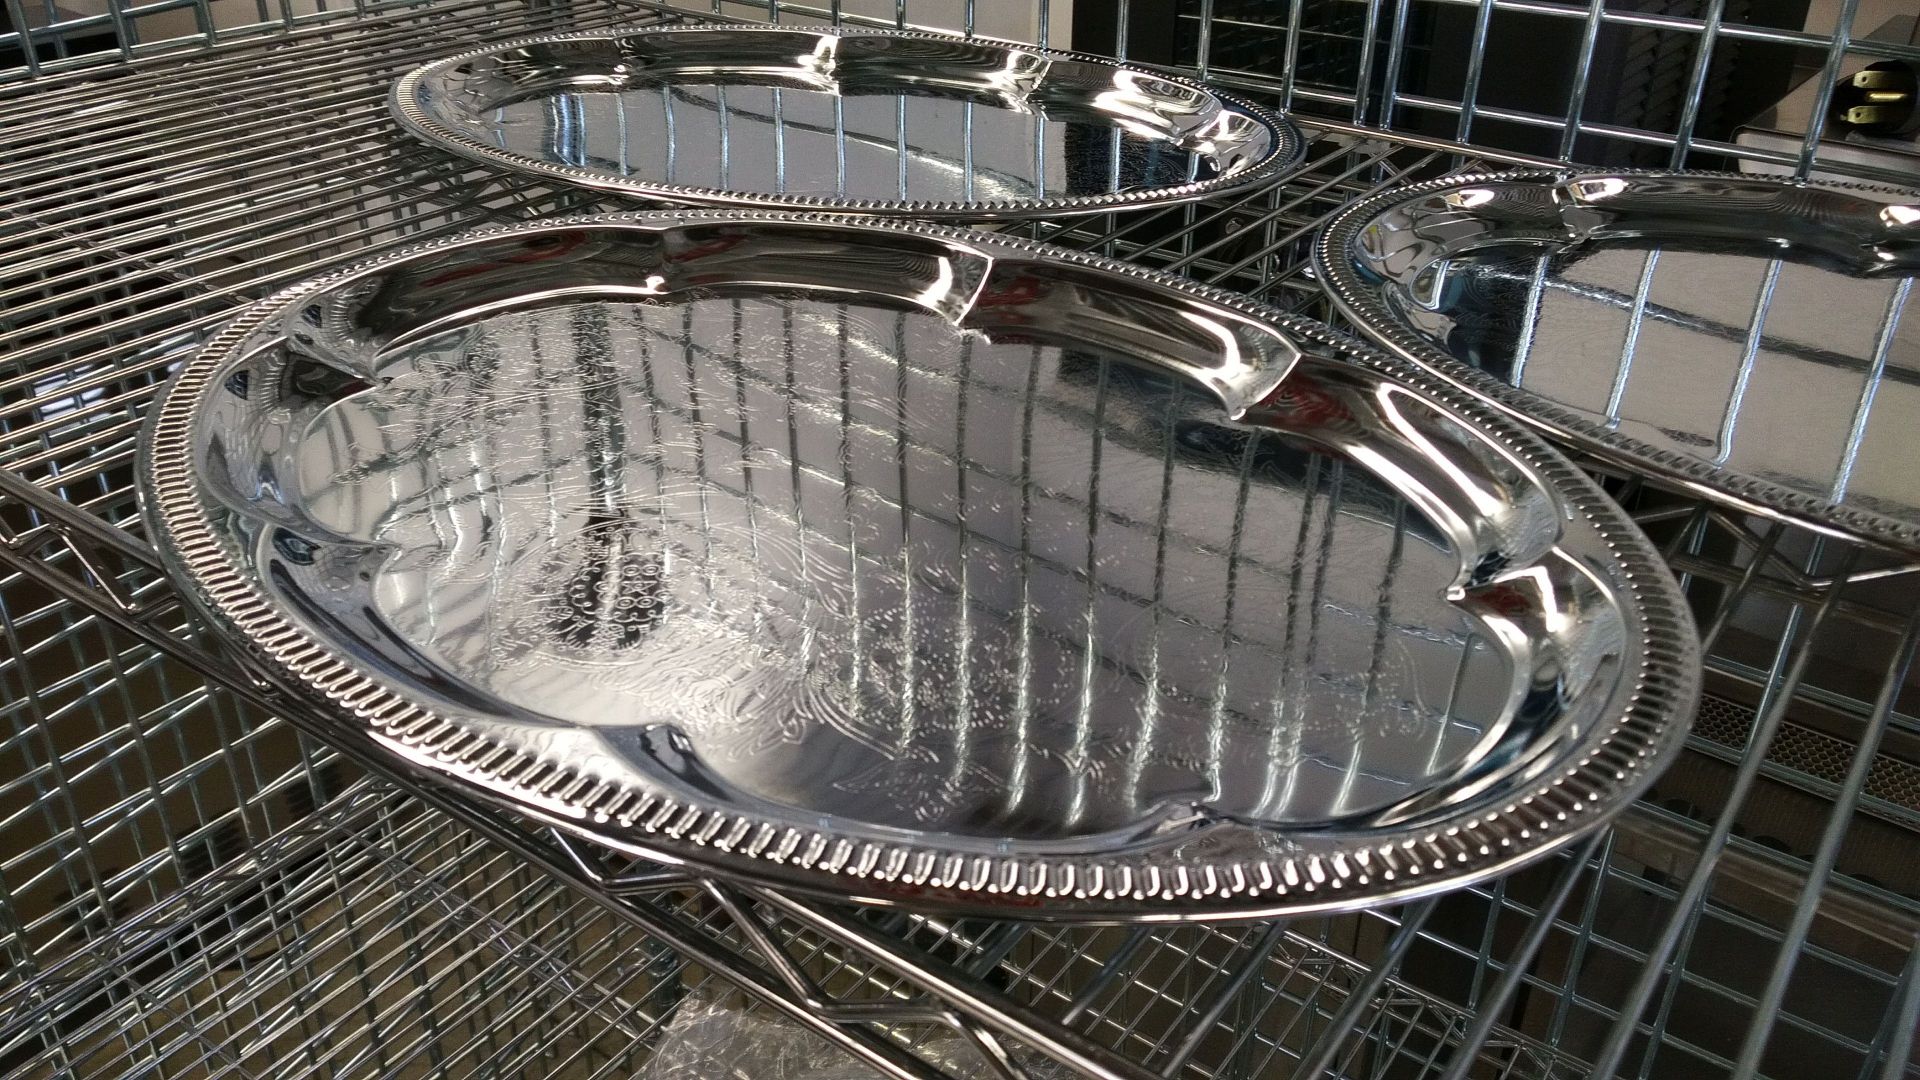 18" Oval Chrome Plated Steel Platters - Lot of 3